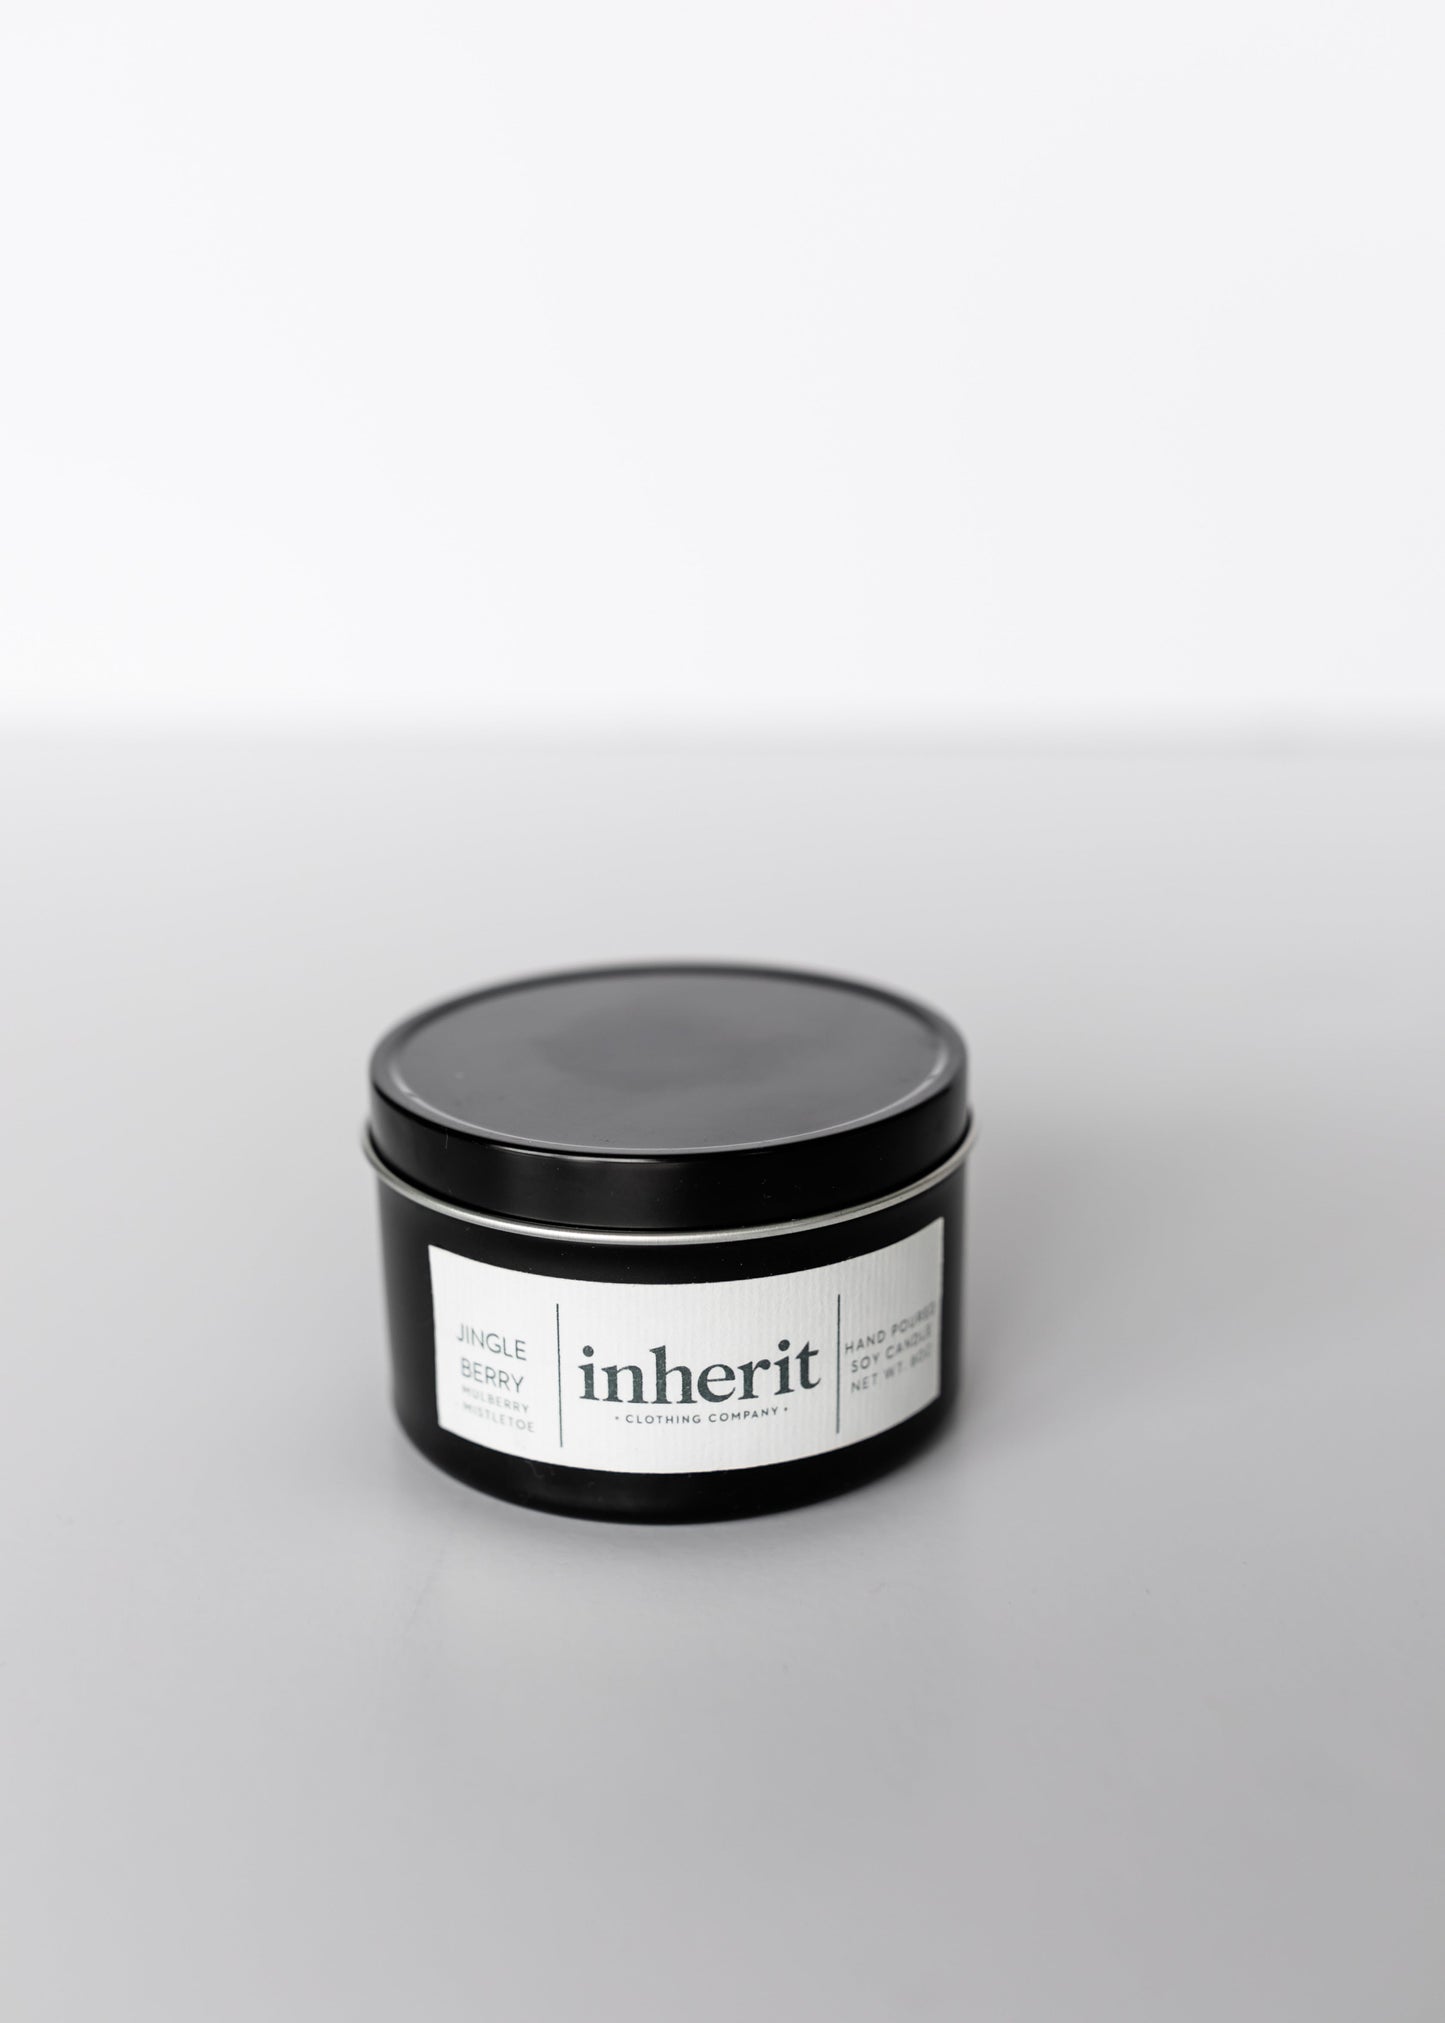 Inherit Winter Scented Soy Candle 8oz. - FINAL SALE Gifts Jingle Berry